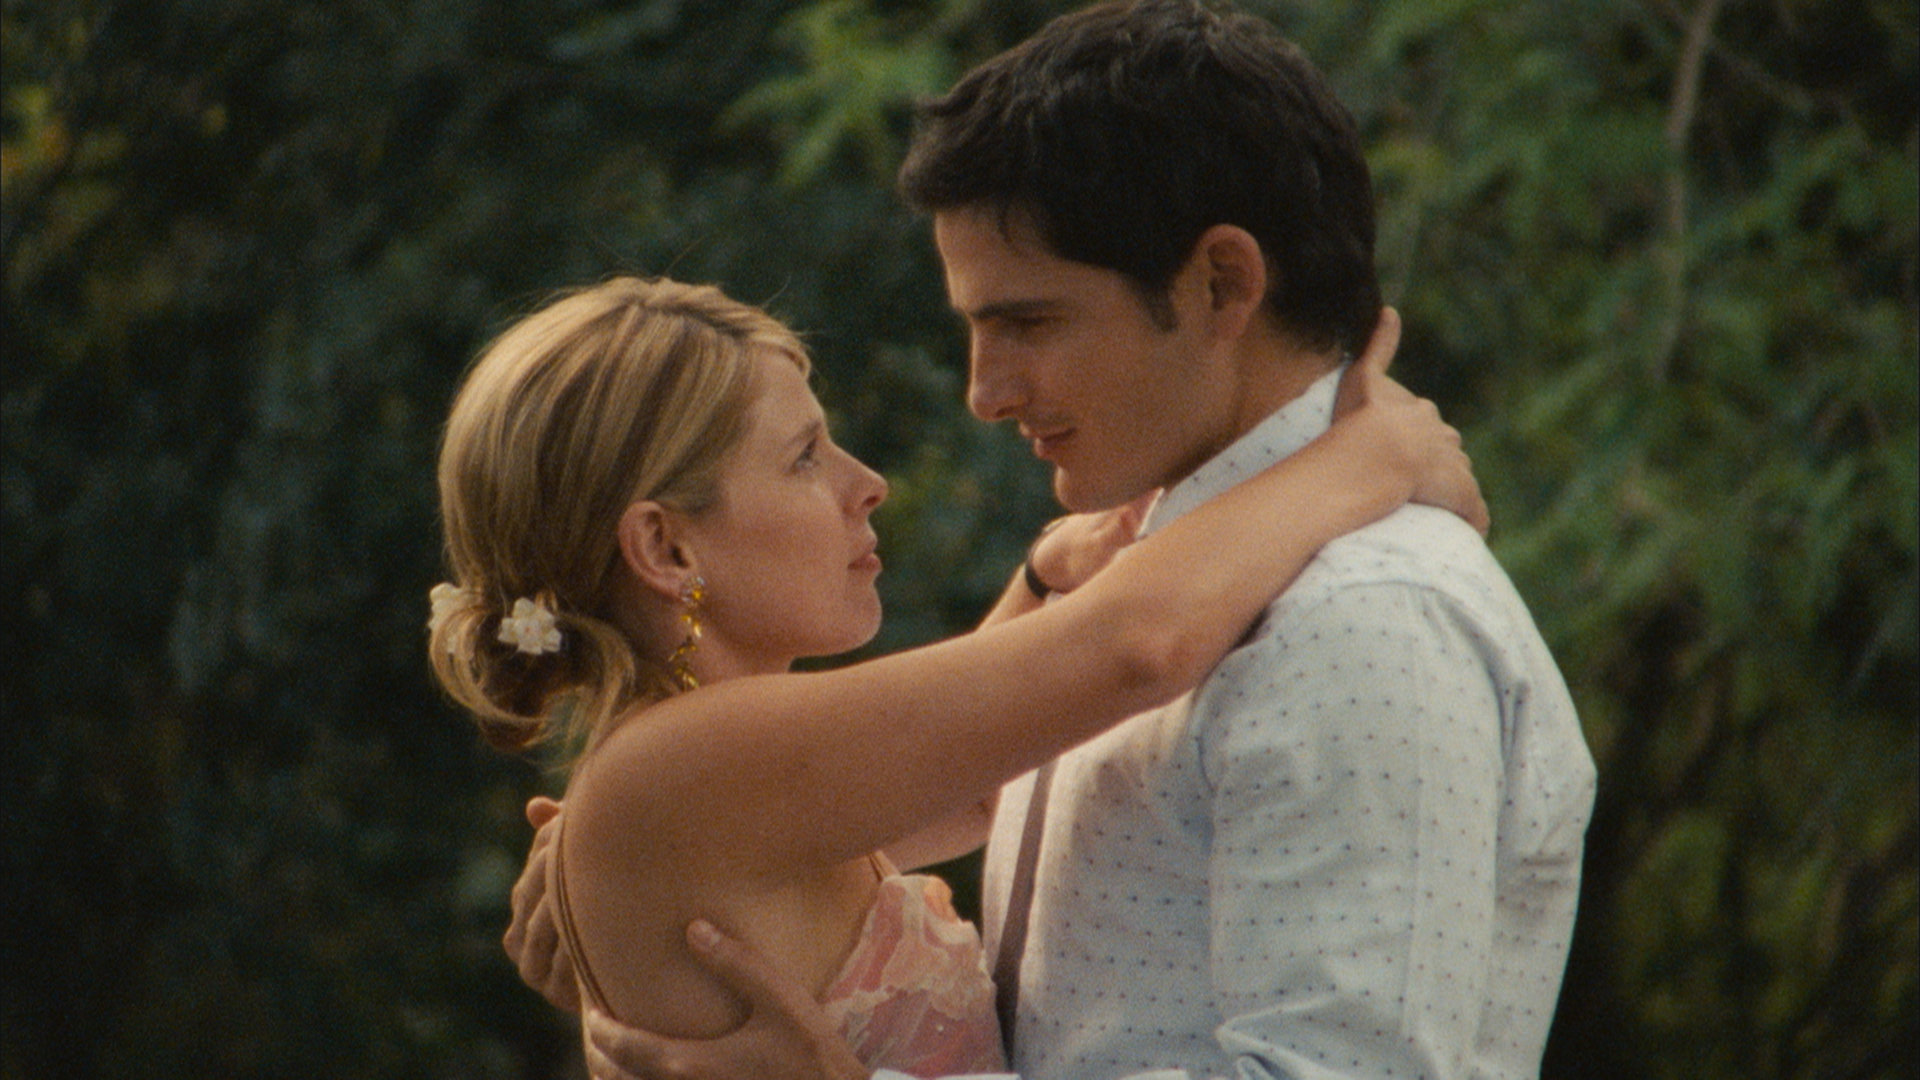 Charlotte Gregg and Matt Zeremes in All My Friends Are Leaving Brisbane (2007)